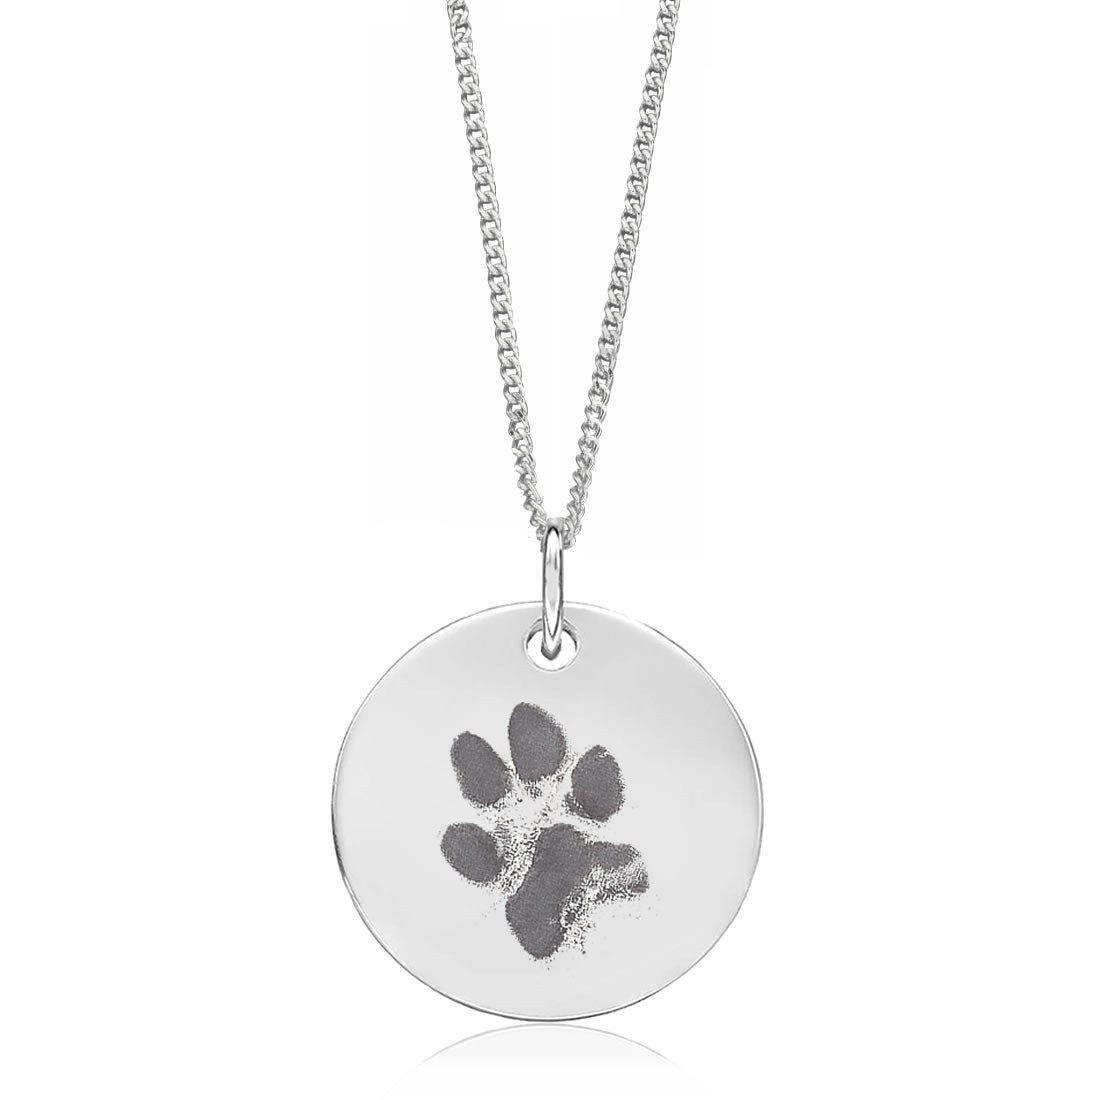 Personalised Paw Print Jewellery | Paw Print Necklace | Pet Jewellery,  Online & UK - Little Fingers 'n' Toes